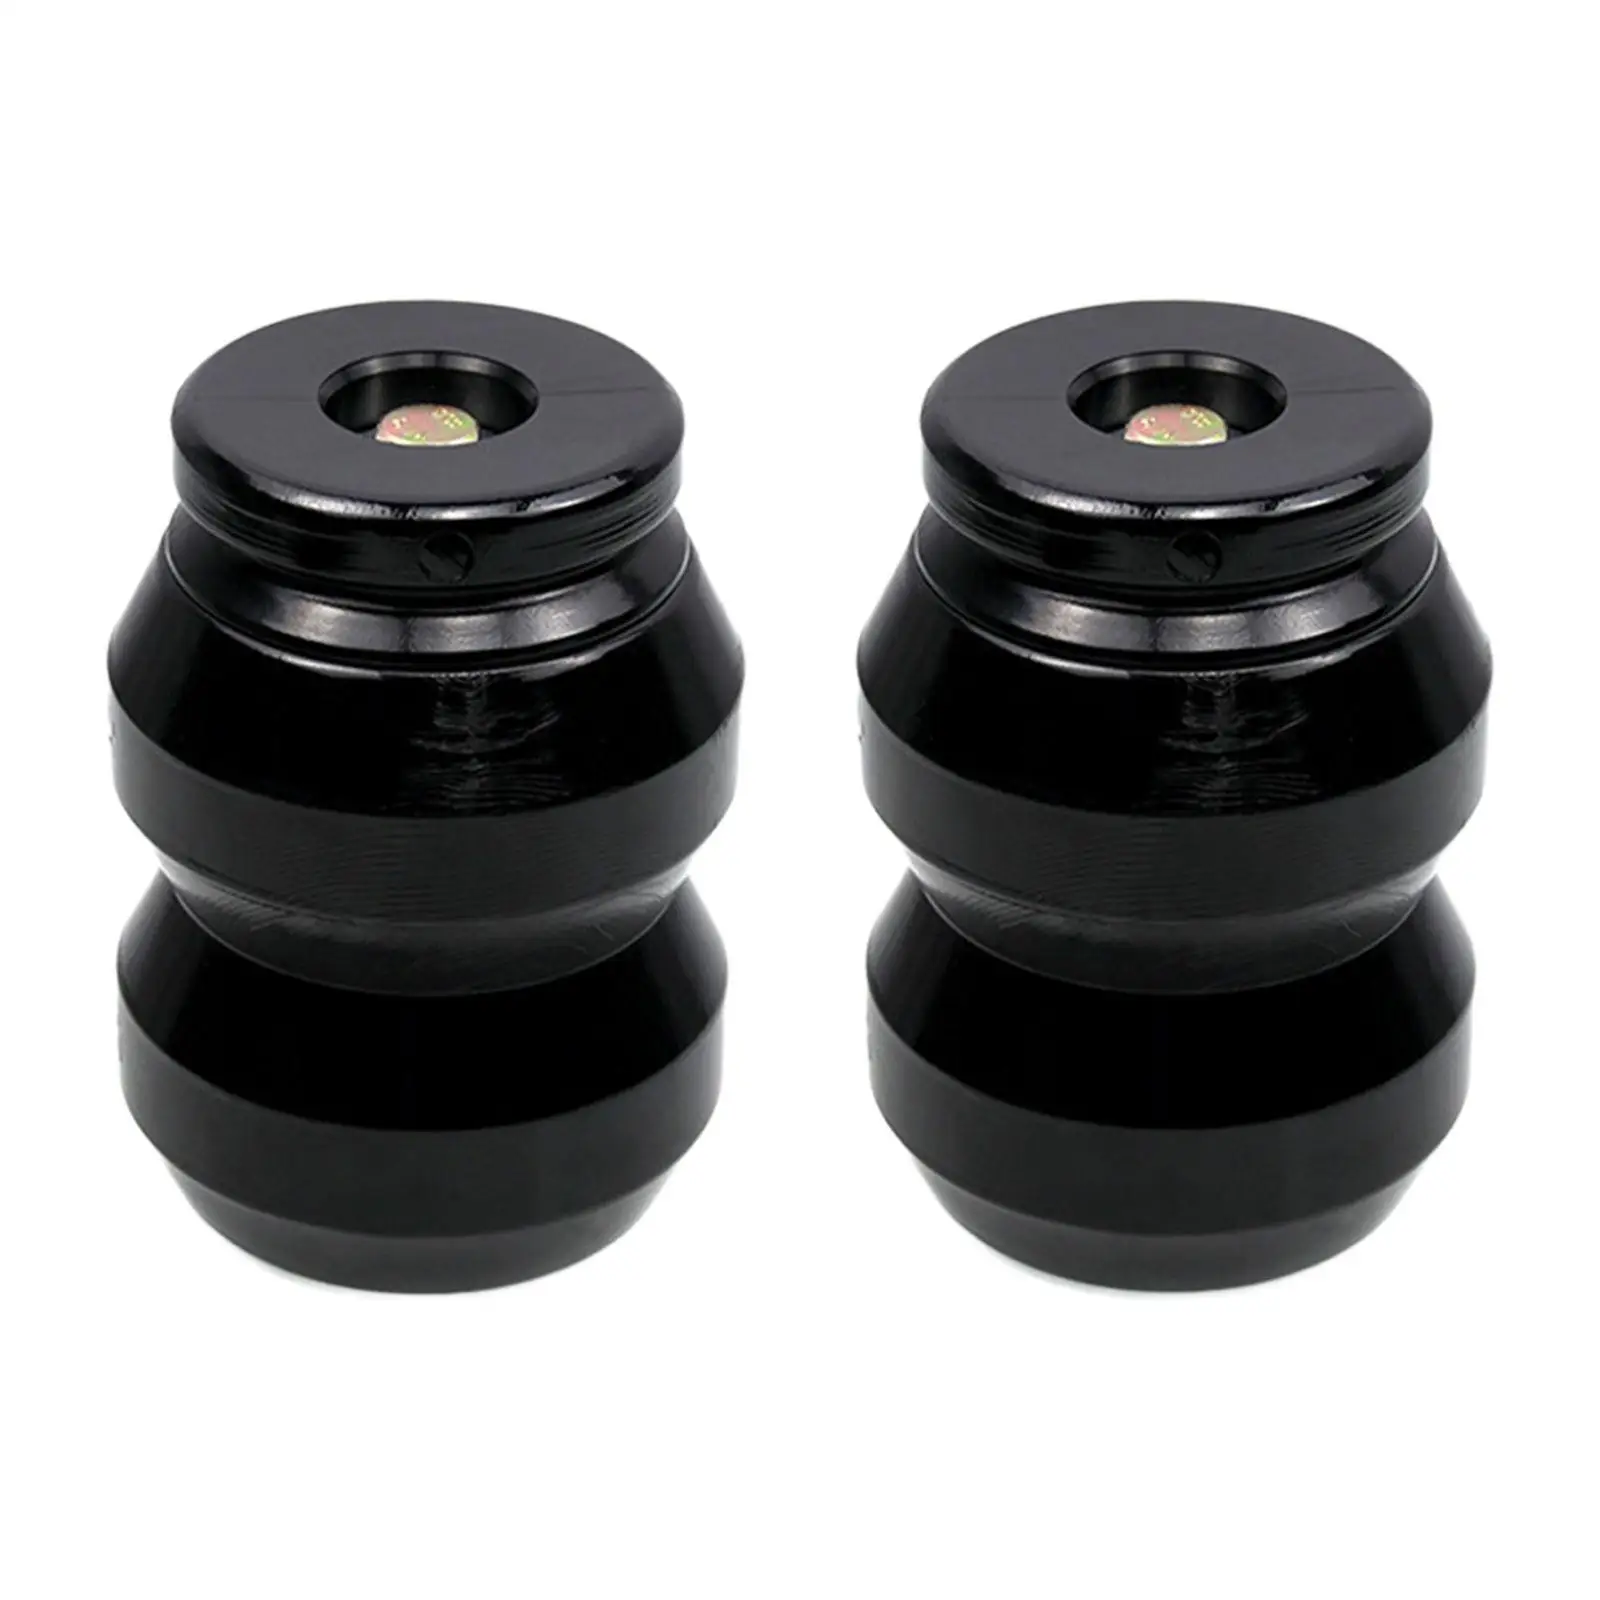 2x Suspension Enhancement System DR1500dq Replace Easy to Install High Quality for Dodge RAM 1500 2009-2021 Accessories